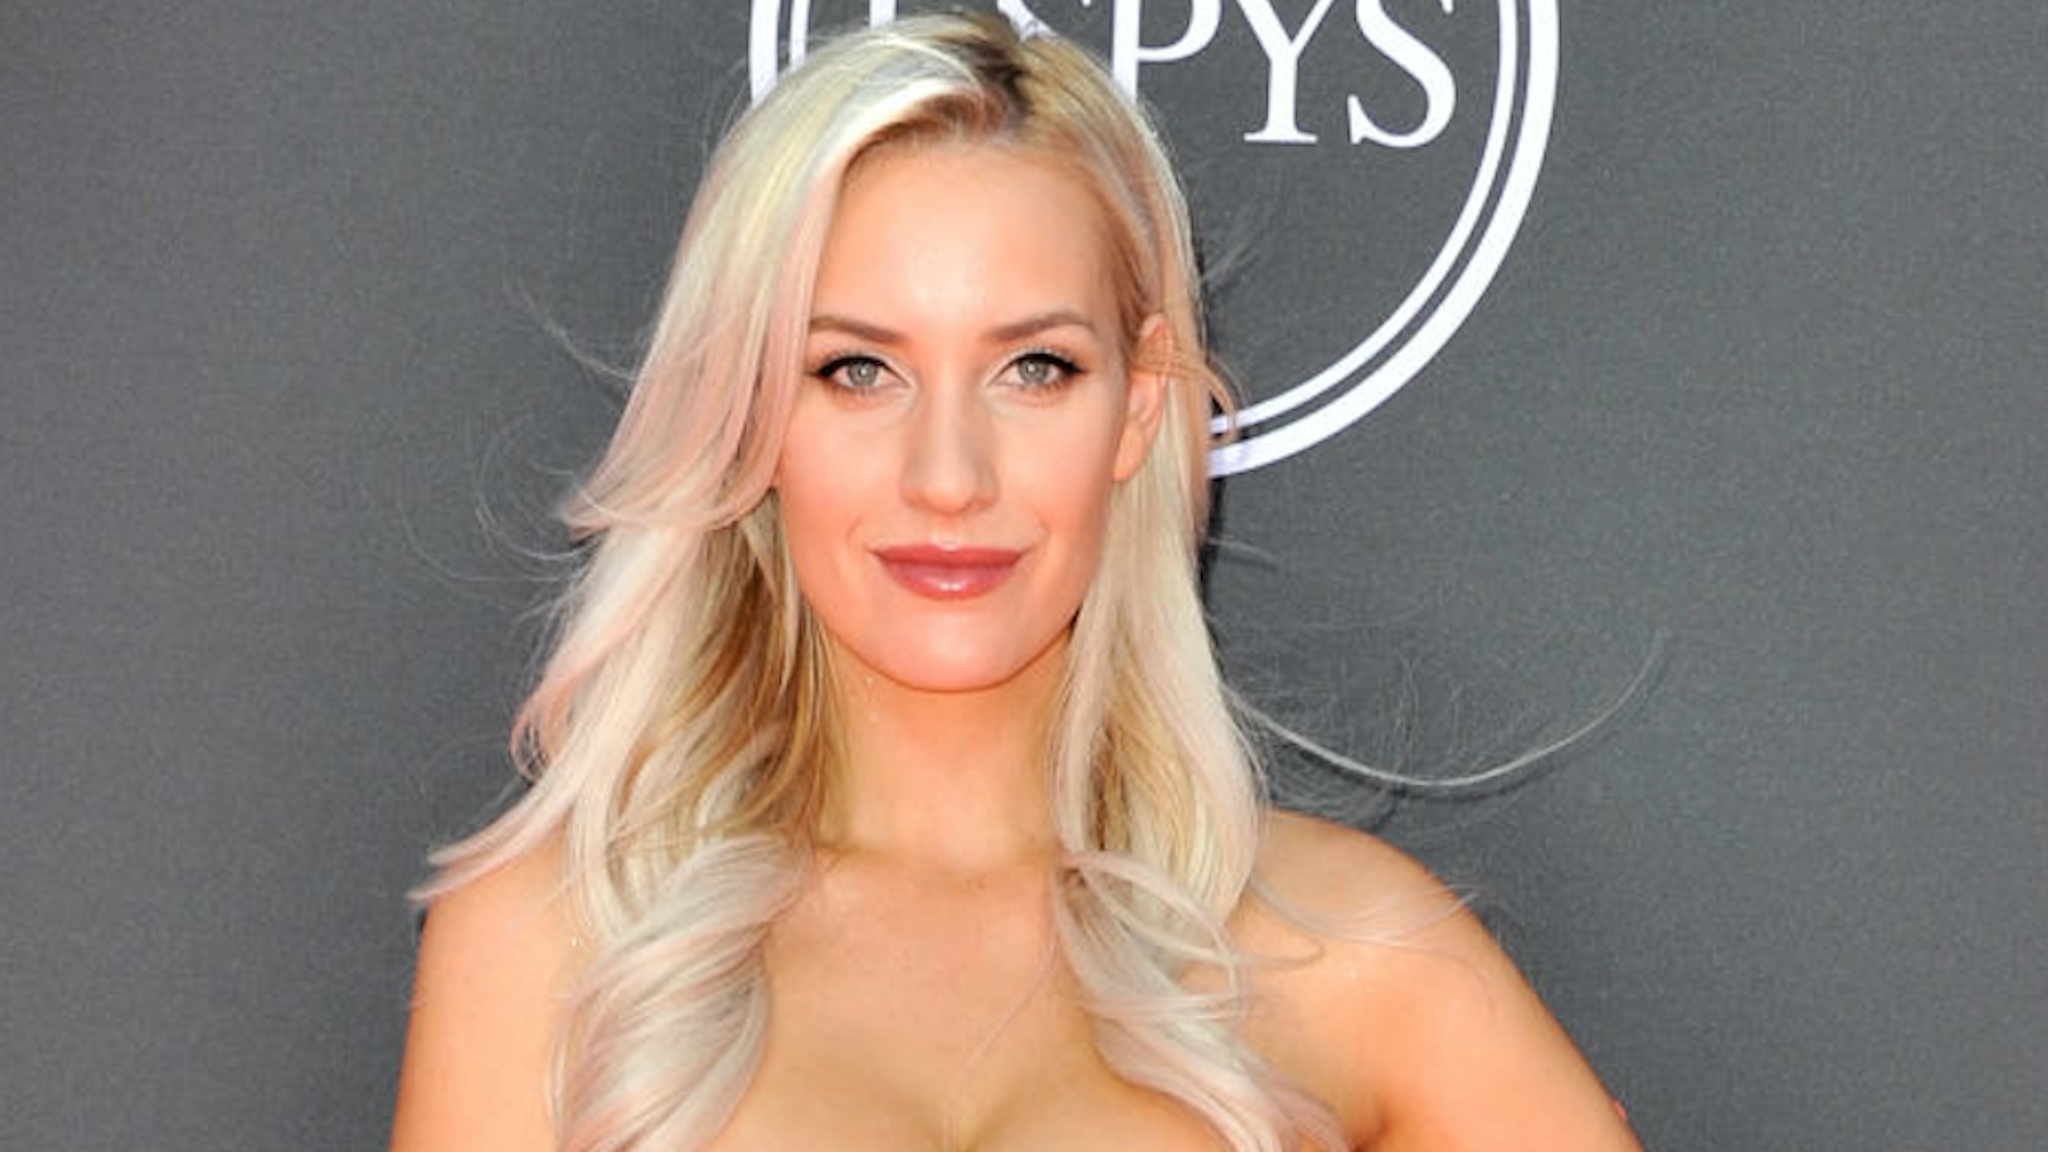 Paige Spiranac attends the 2019 ESPY Awards at Microsoft Theater on July 10, 2019 in Los Angeles, California.